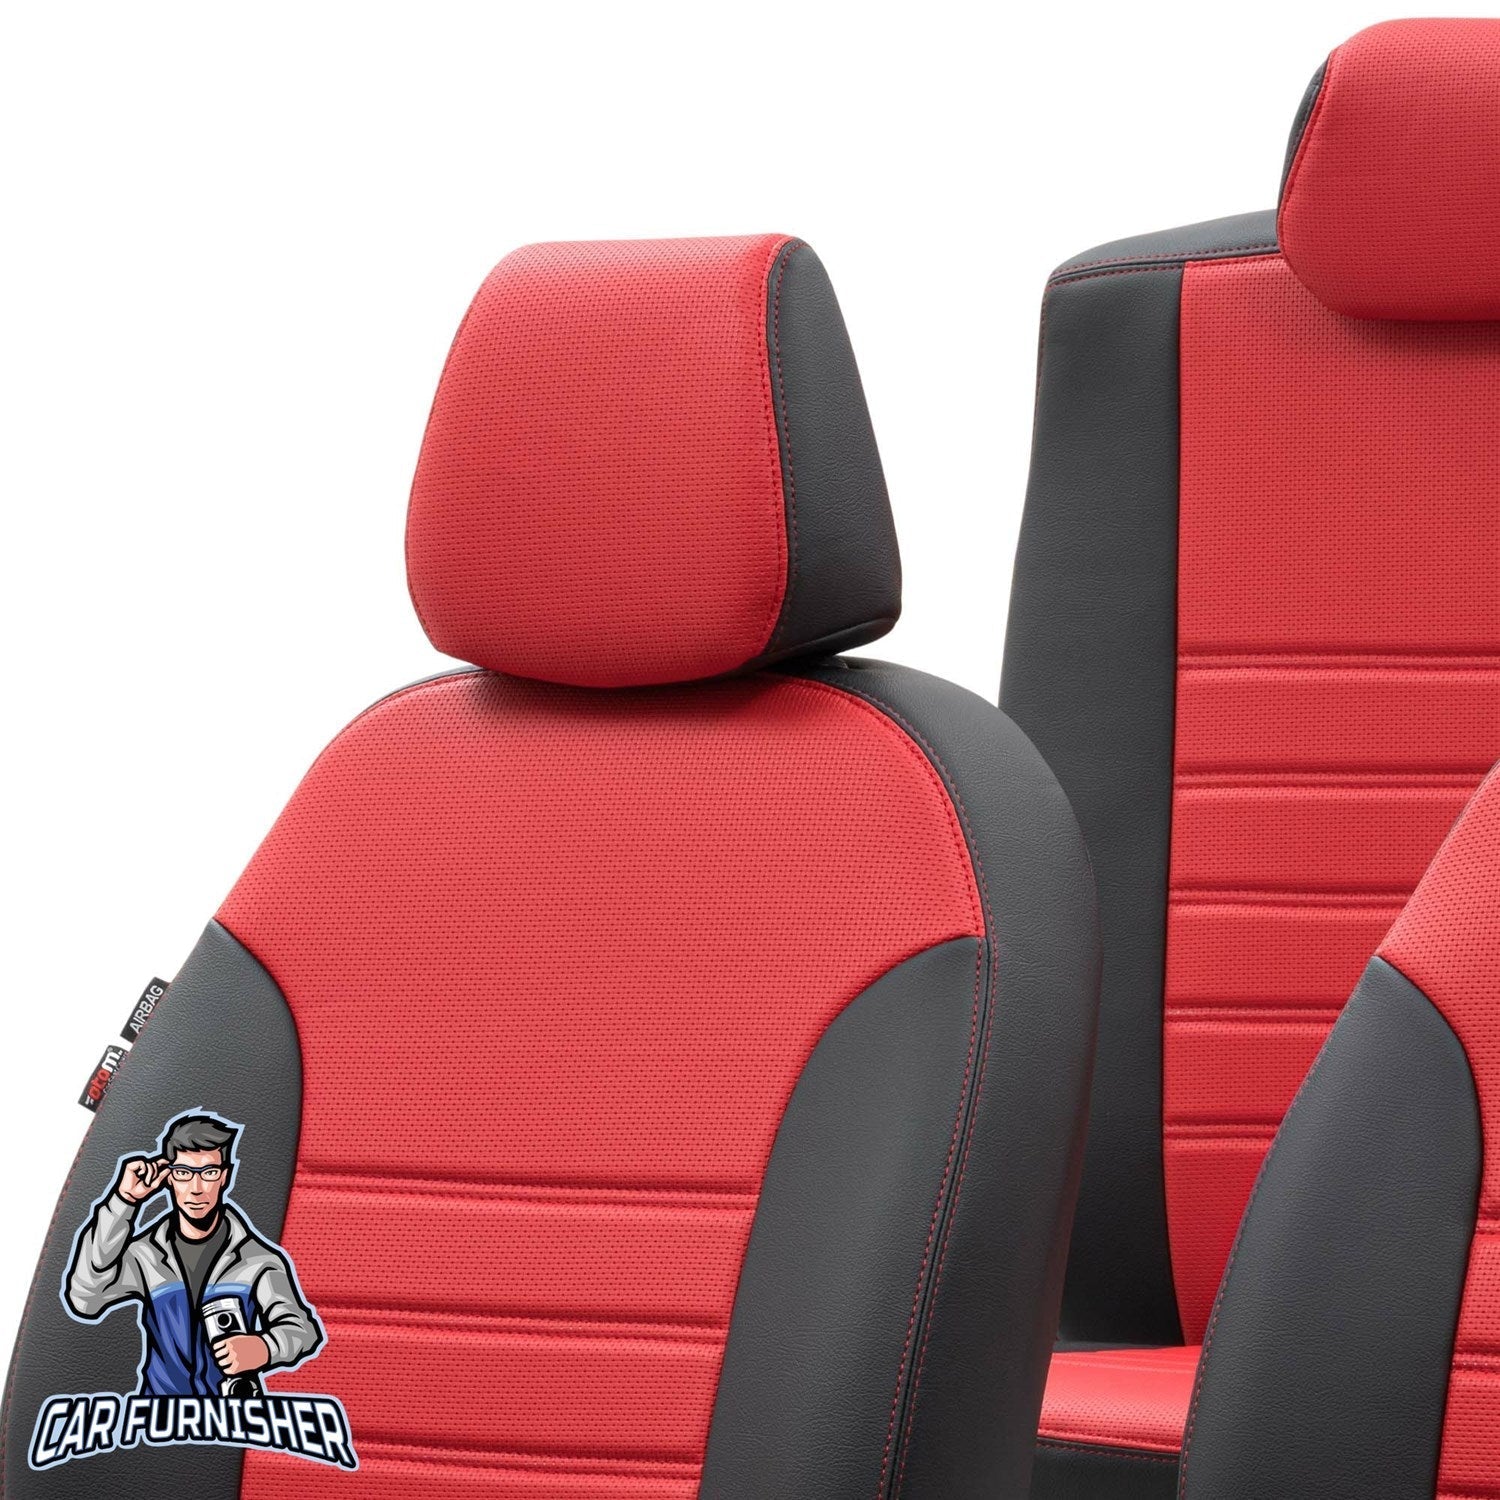 Ford Kuga Seat Covers New York Leather Design Red Leather